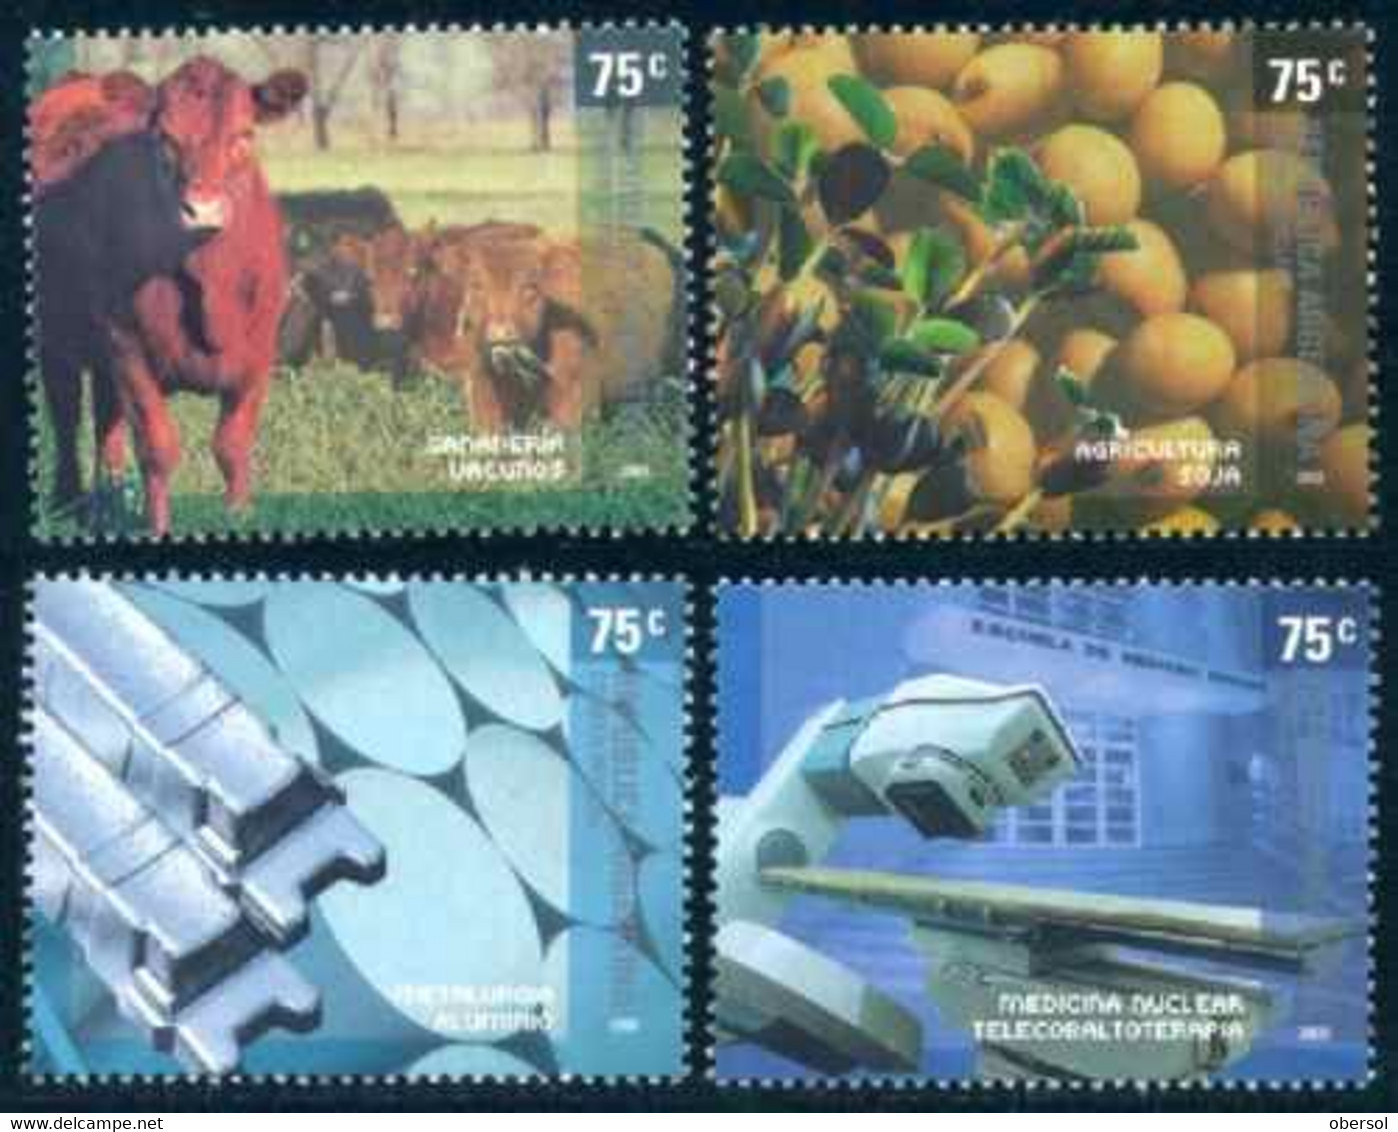 Argentina 2003 Technology, Industrie, Production Complete Set Of 4 Values MNH - Unused Stamps